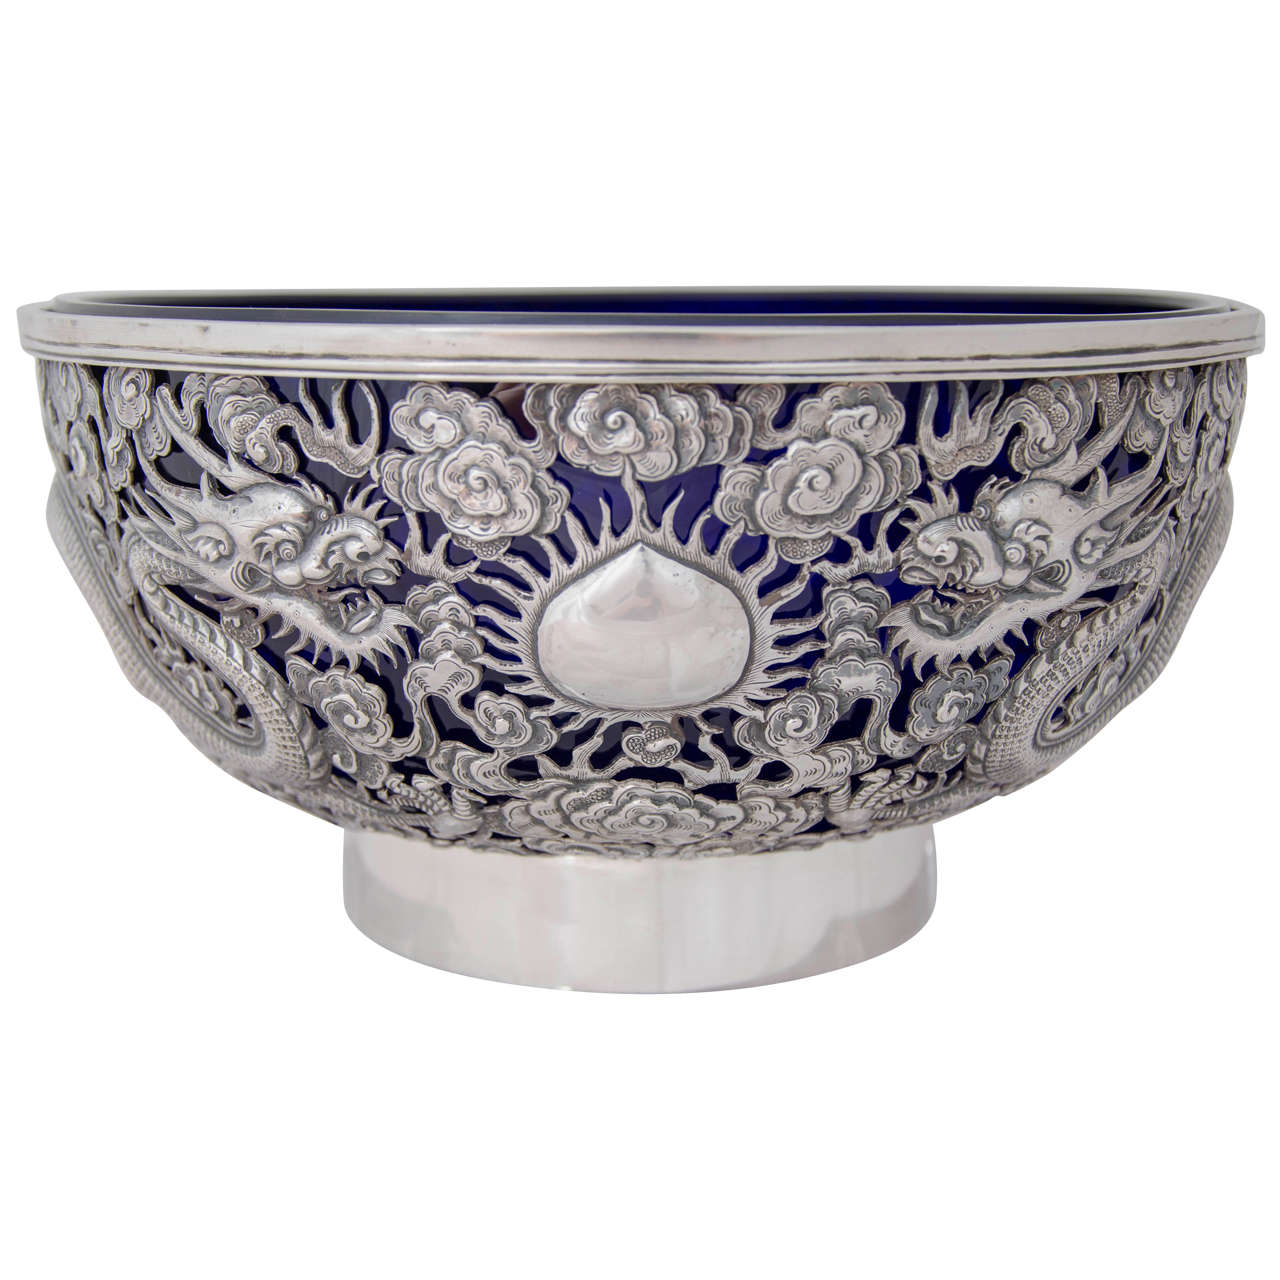 A Large Chinese Export Silver Bowl circa 1890, beautifully pierced with 2 opposing dragons separated by a flaming pearl, and a third dragon breathing fire, and with a blue glass liner. 
Marked WH for Wang Hing '宏兴‘ which was the largest silver